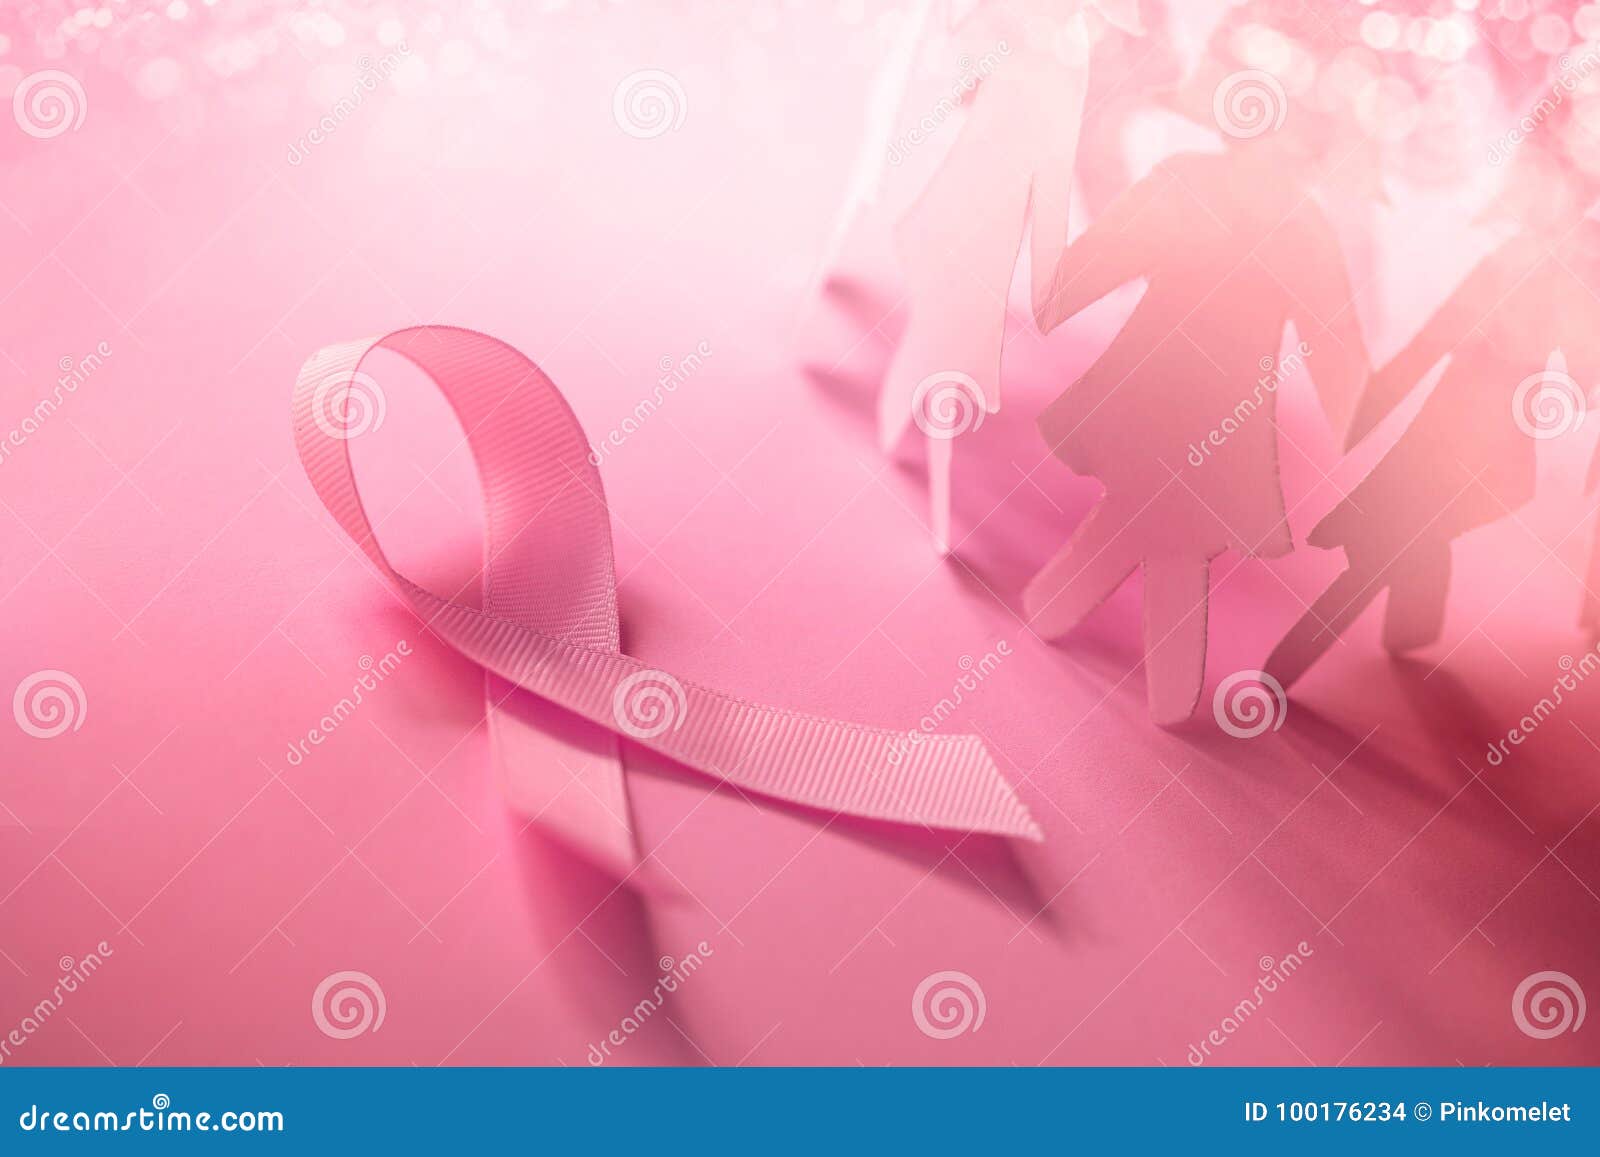 the sweet pink ribbon  with girl paper doll on pink background for breast cancer awareness  to promote in october mo